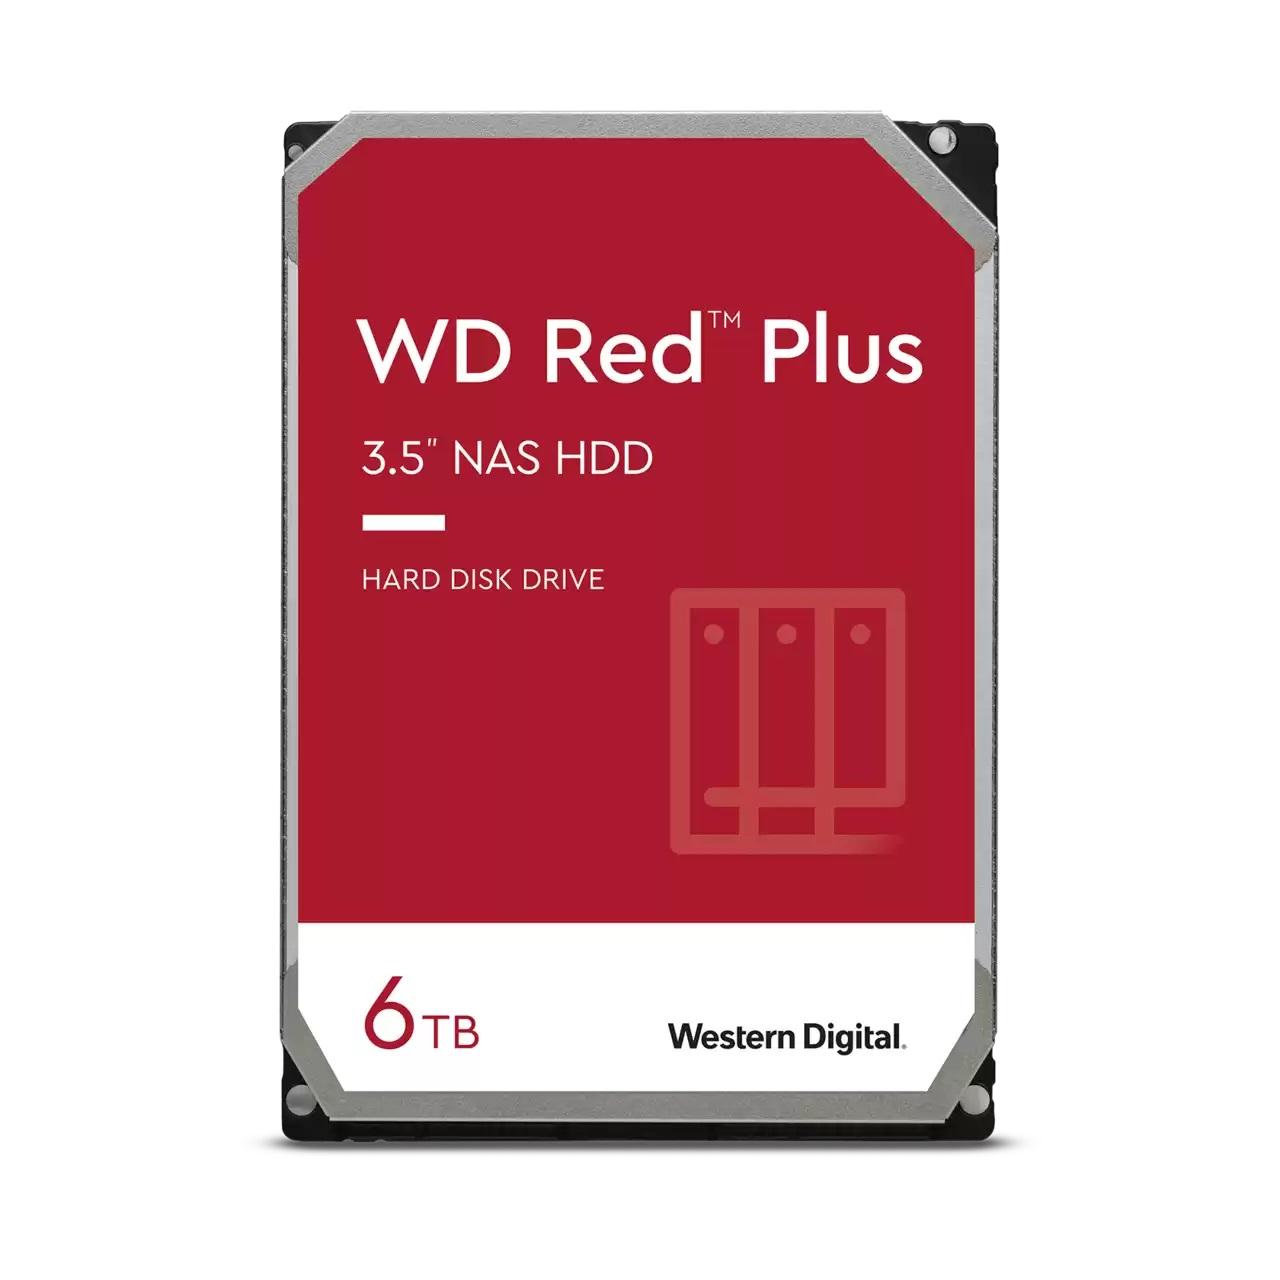 Хард диск WD Red Plus, 6TB NAS, 3.5&quot;, 256MB, 5400RPM, WD60EFPX